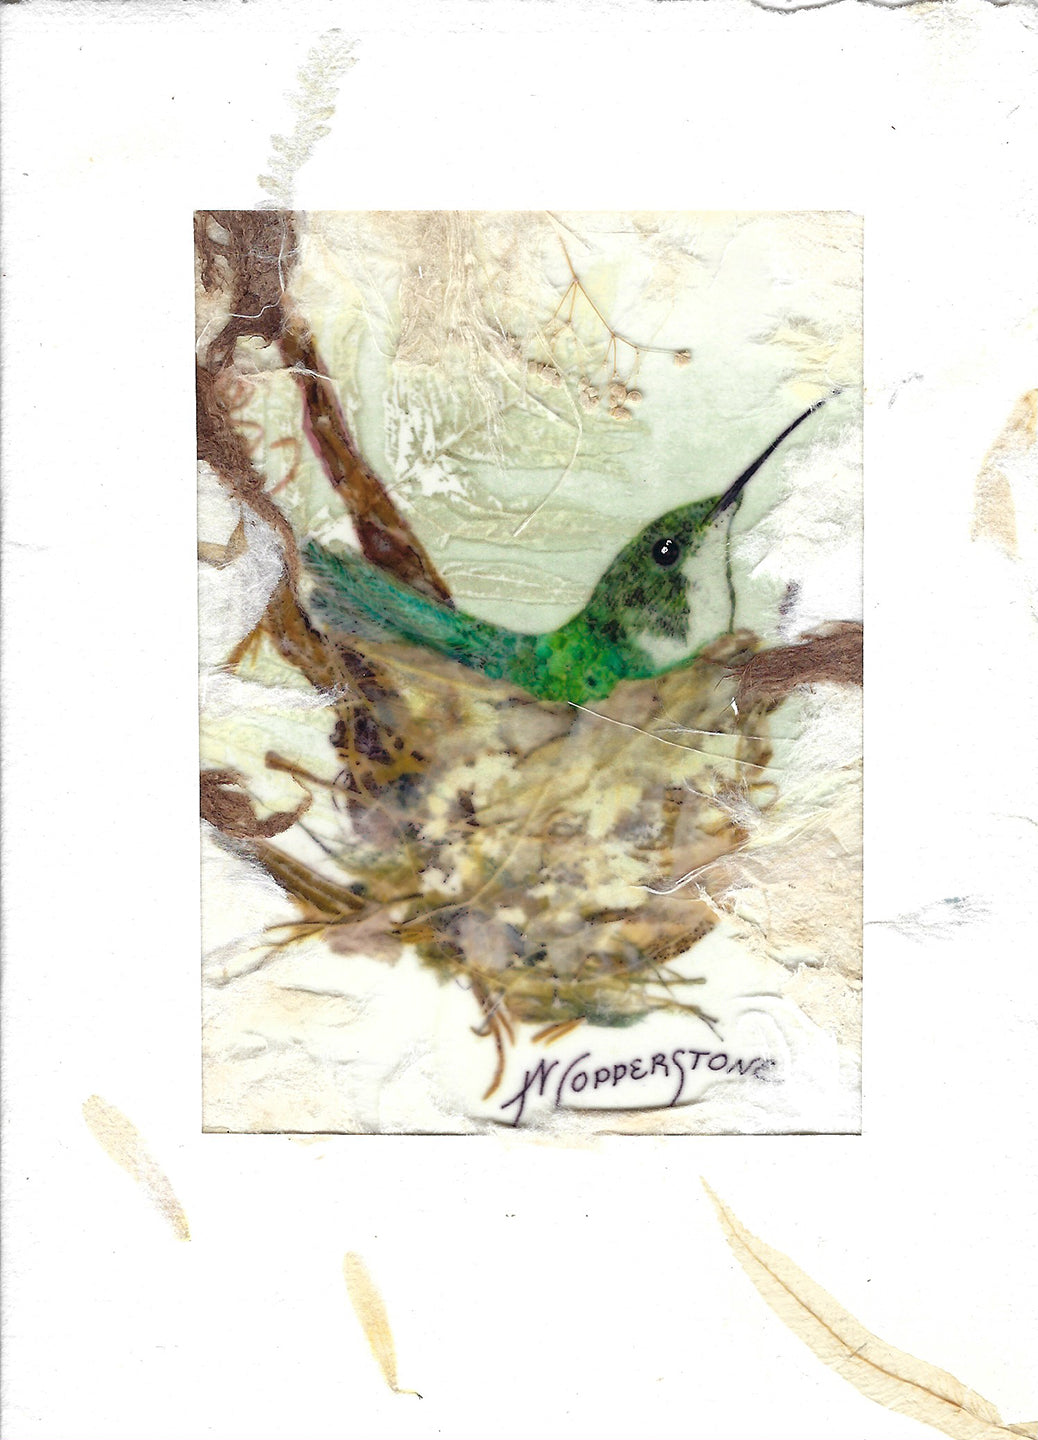 Black chinned hummingbird mixed media print by Janice A. Copperstone.